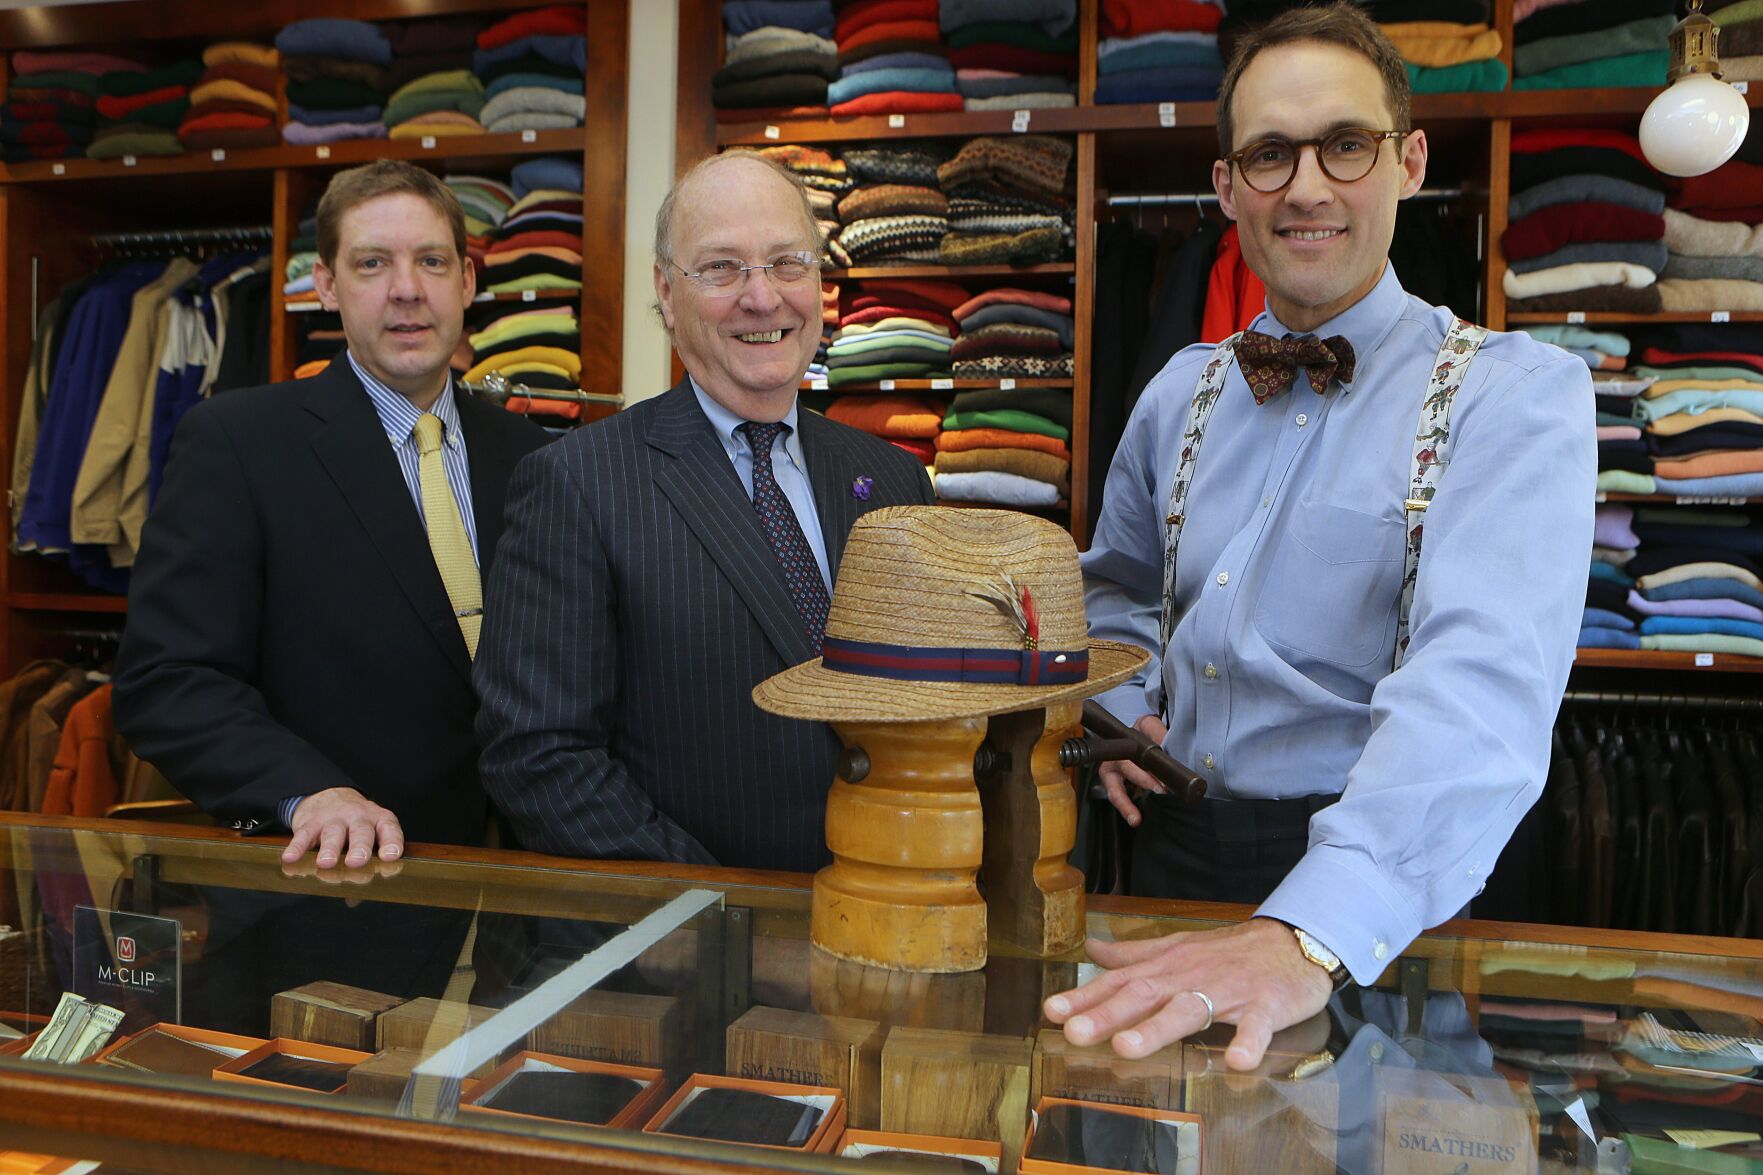 O'Connell's becomes a global purveyor of old time fashion